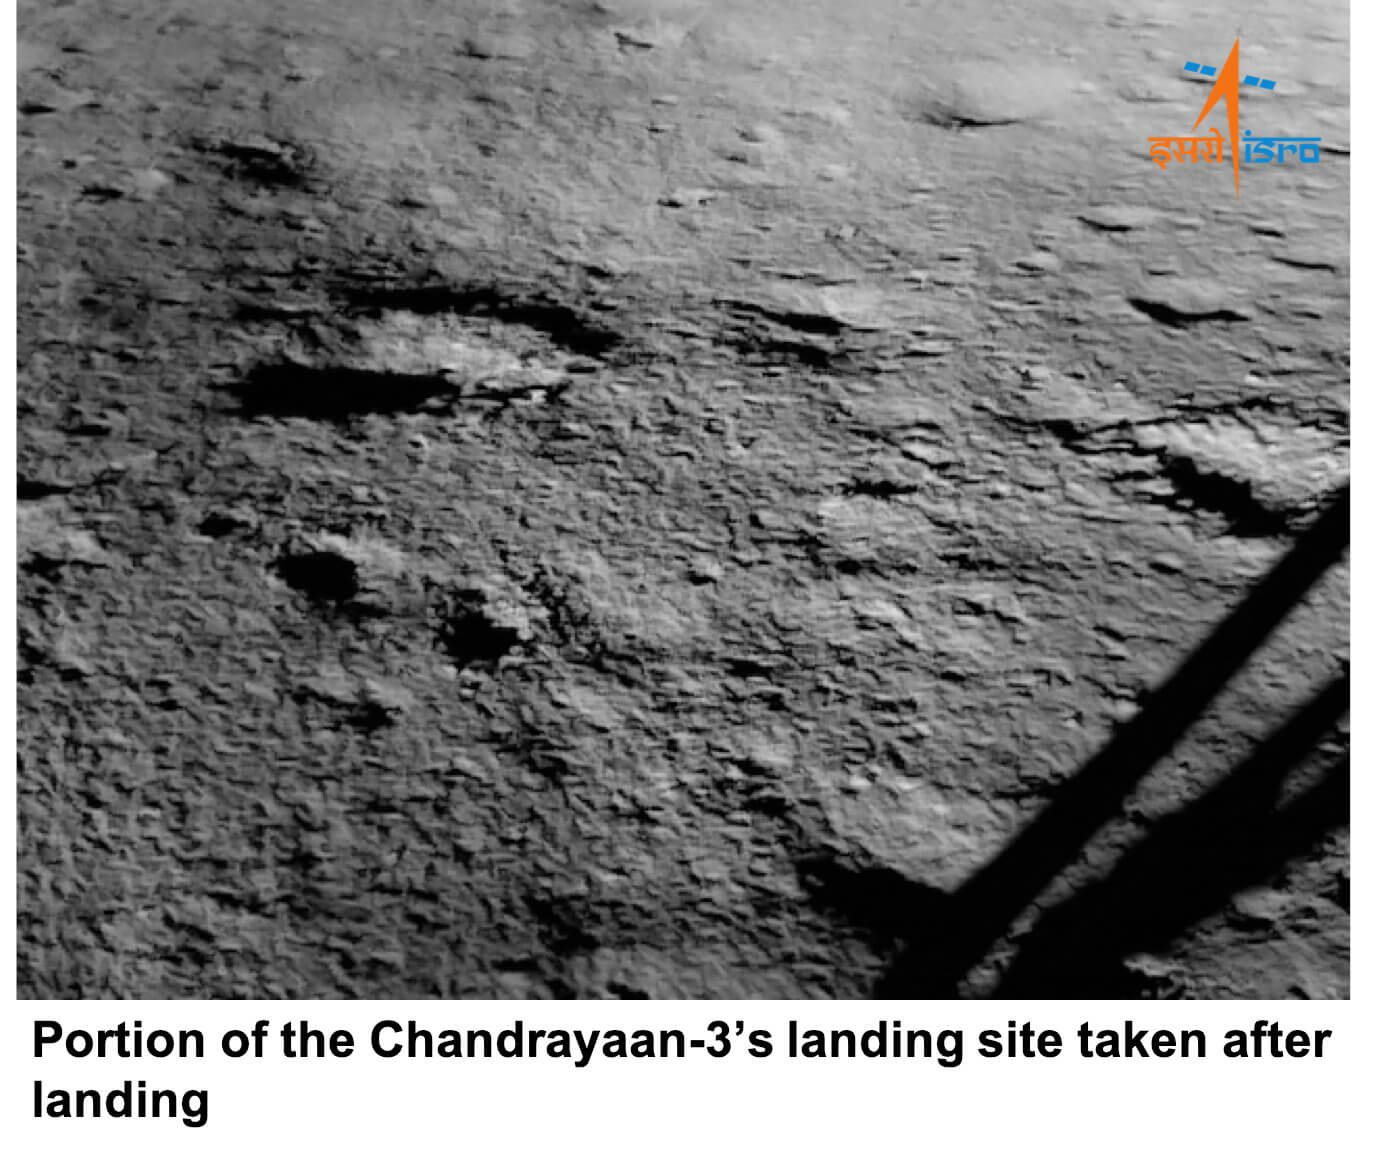 Successful Soft Landing of Chandrayaan-3 on the Lunar South Pole